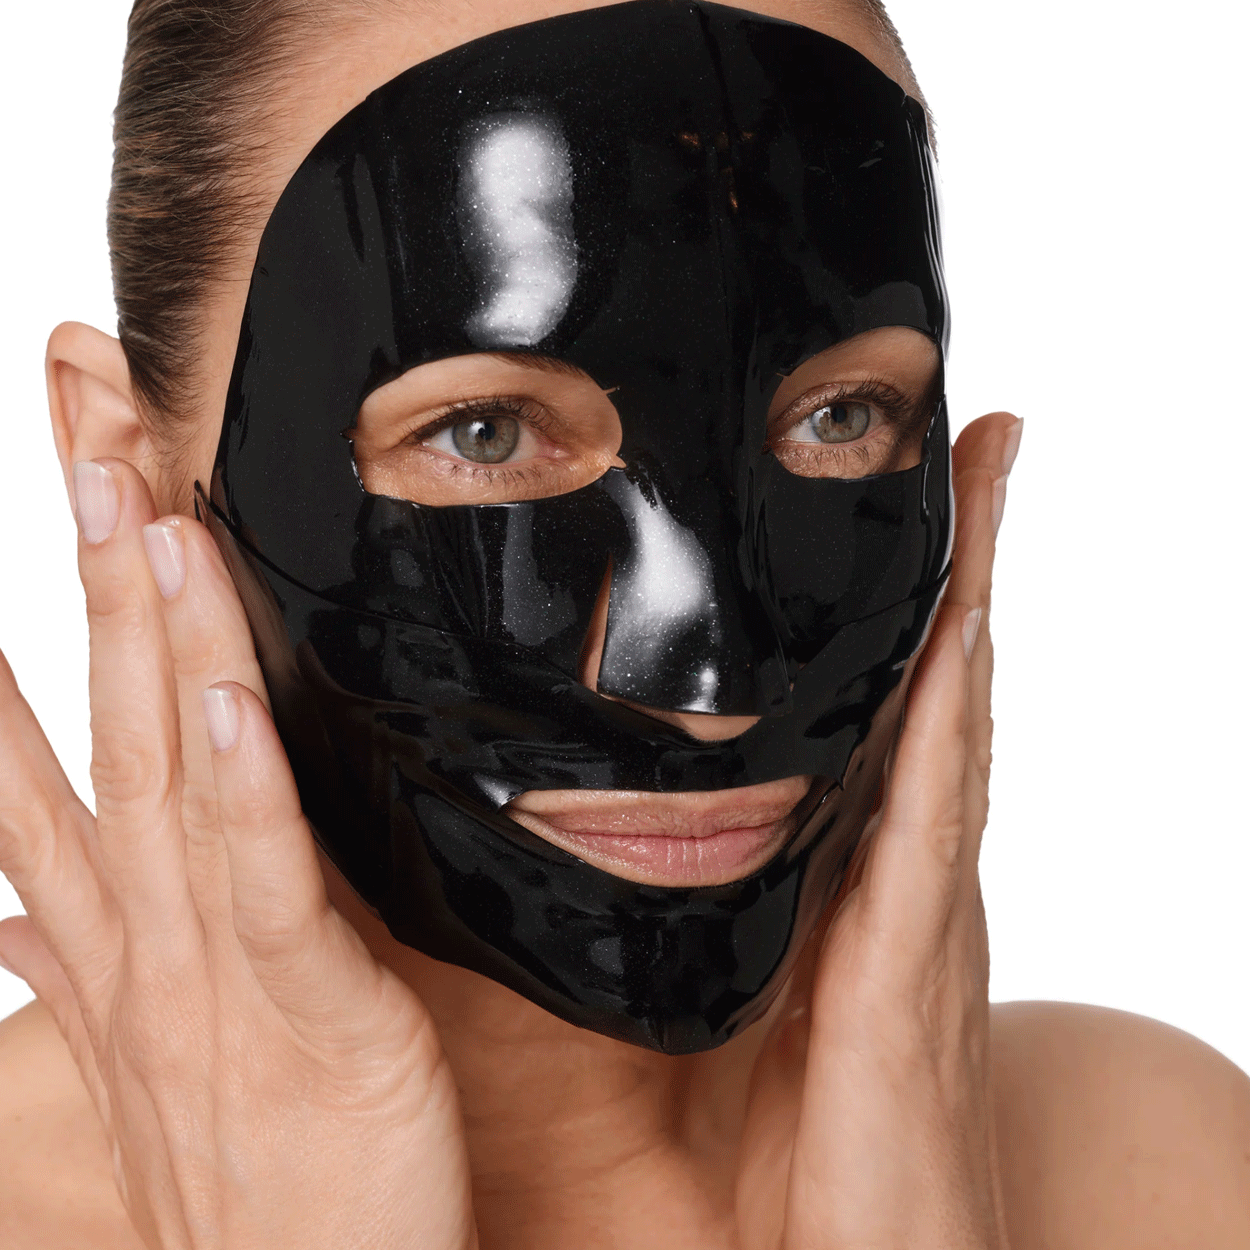 Celestial Black Diamond Lifting and Firming Treatment Mask